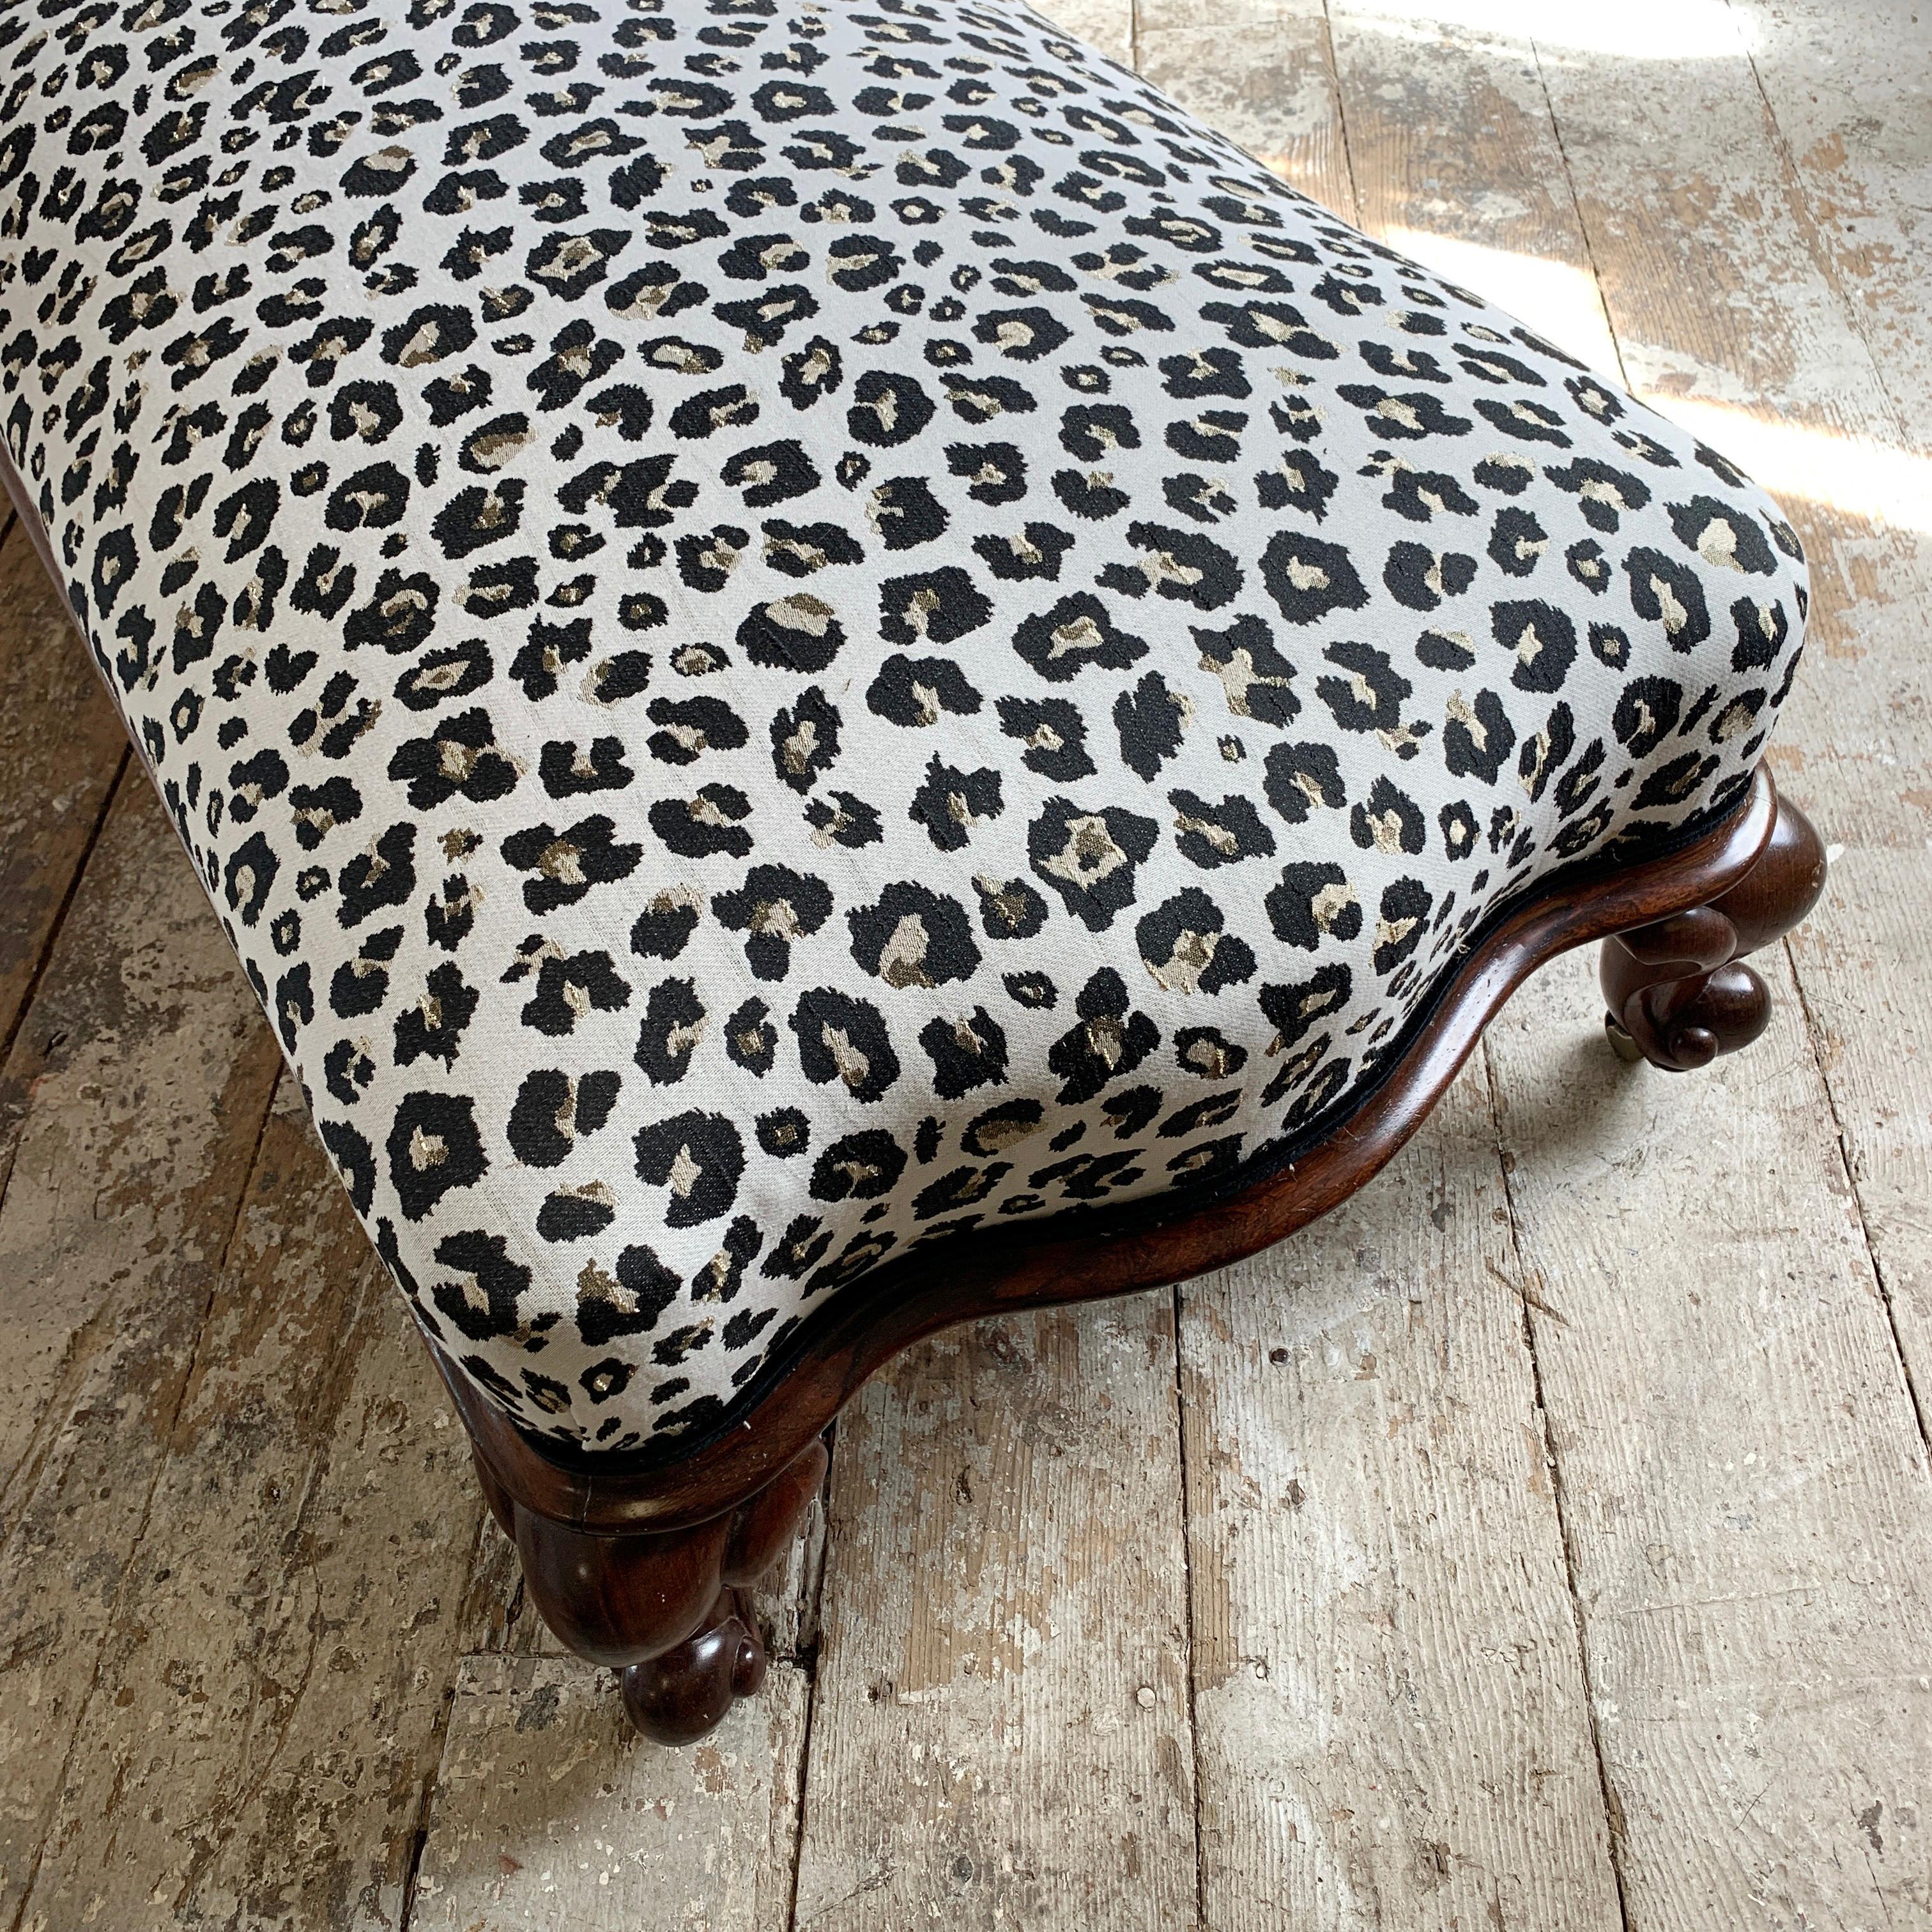 Antique Victorian Chaise Longue in Woven Leopard Jacquard For Sale 5